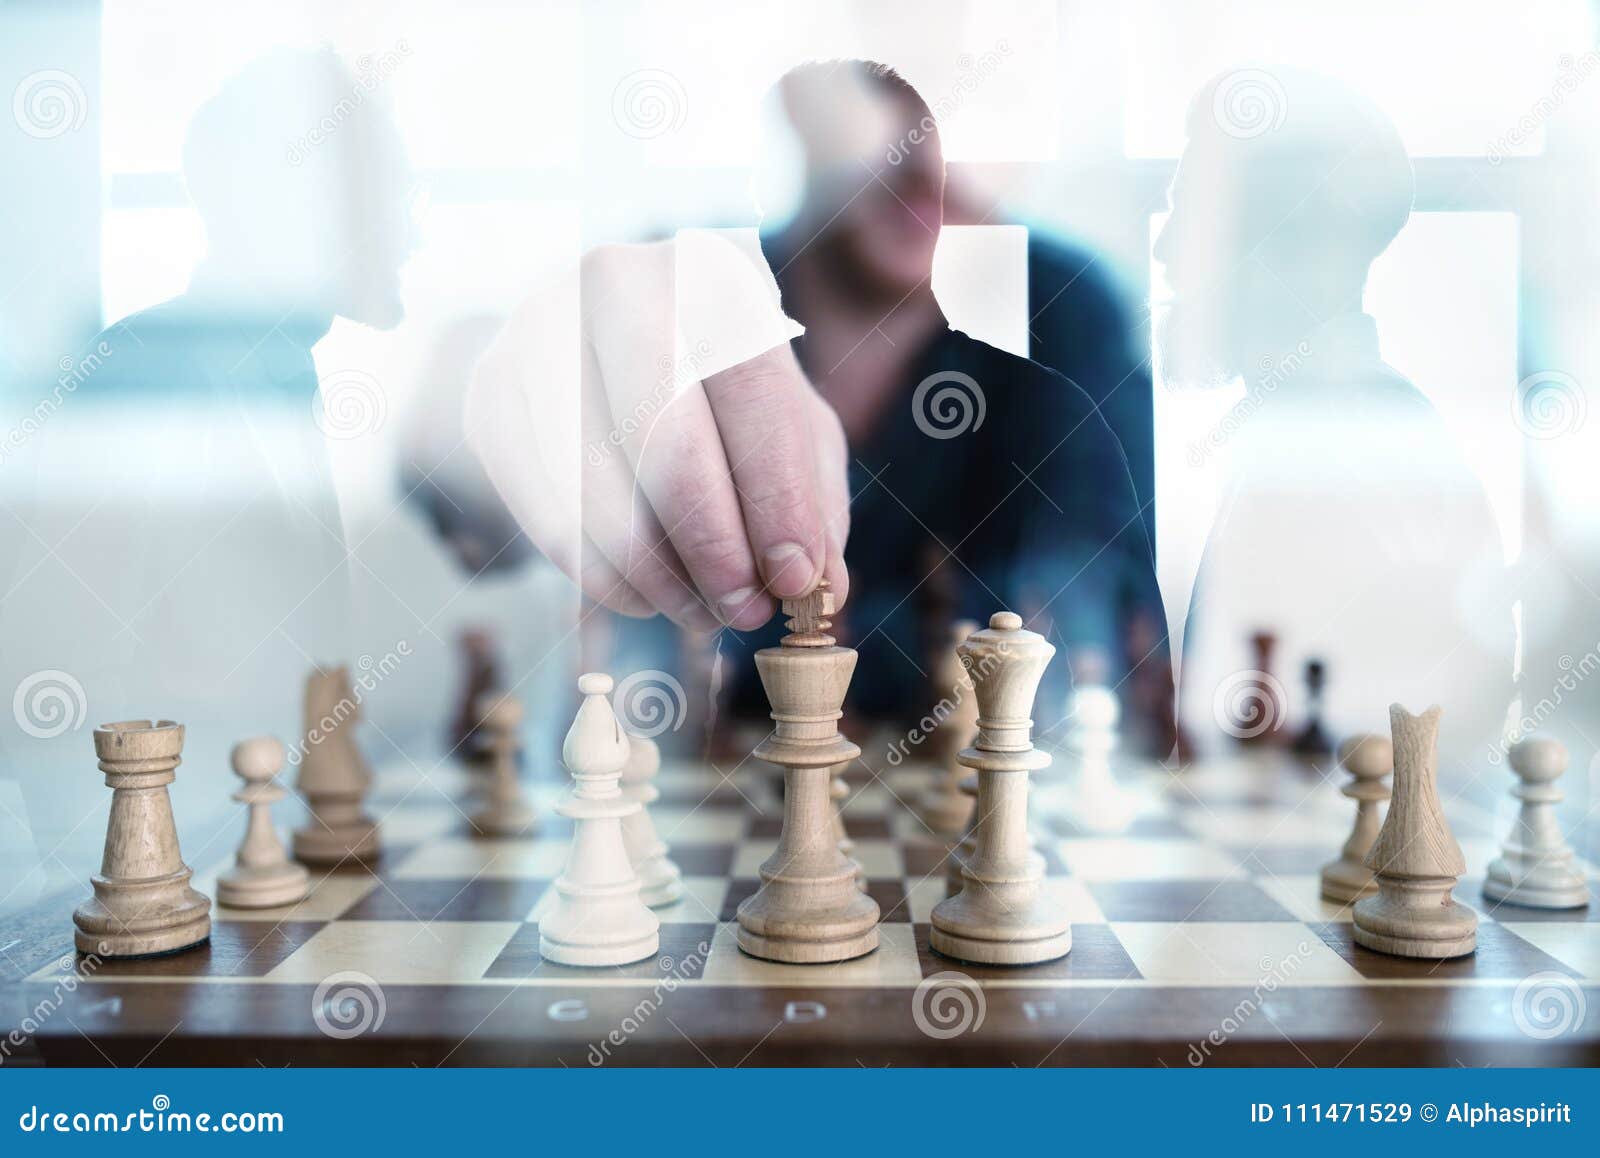 business tactic with chess game and businessmen that work together in office. concept of teamwork, partnership and